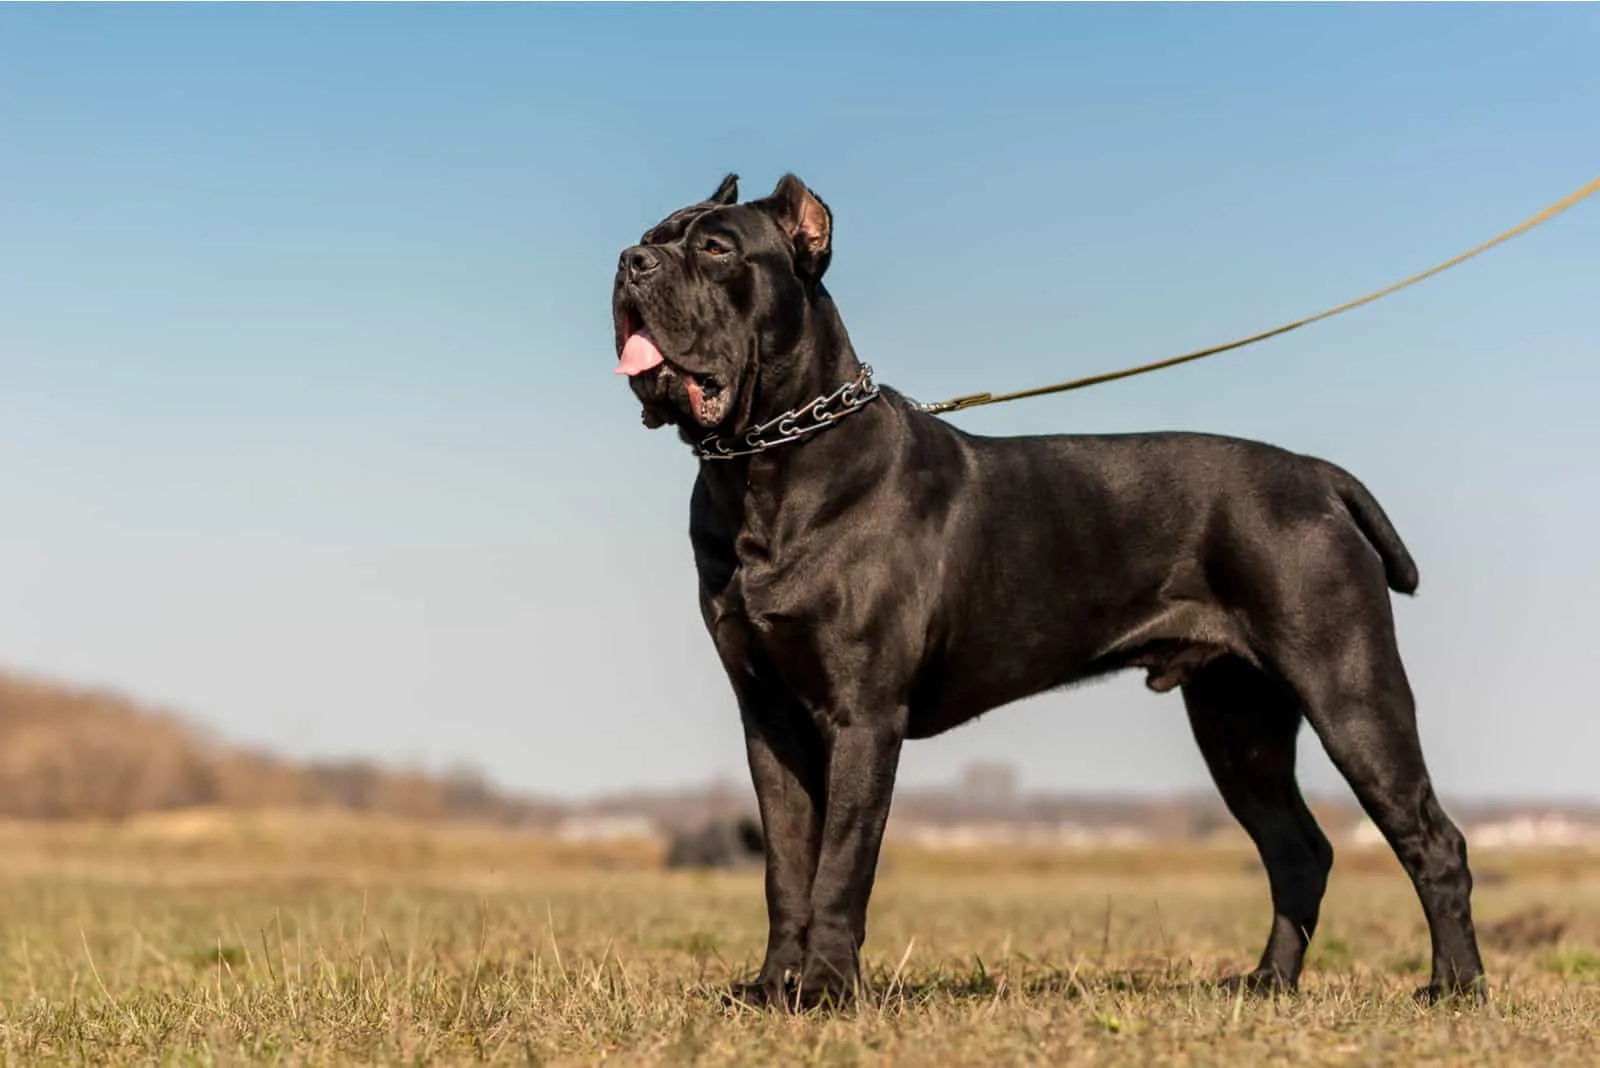 Black cane-corso dog is in a metallic collar and leash stands on the field